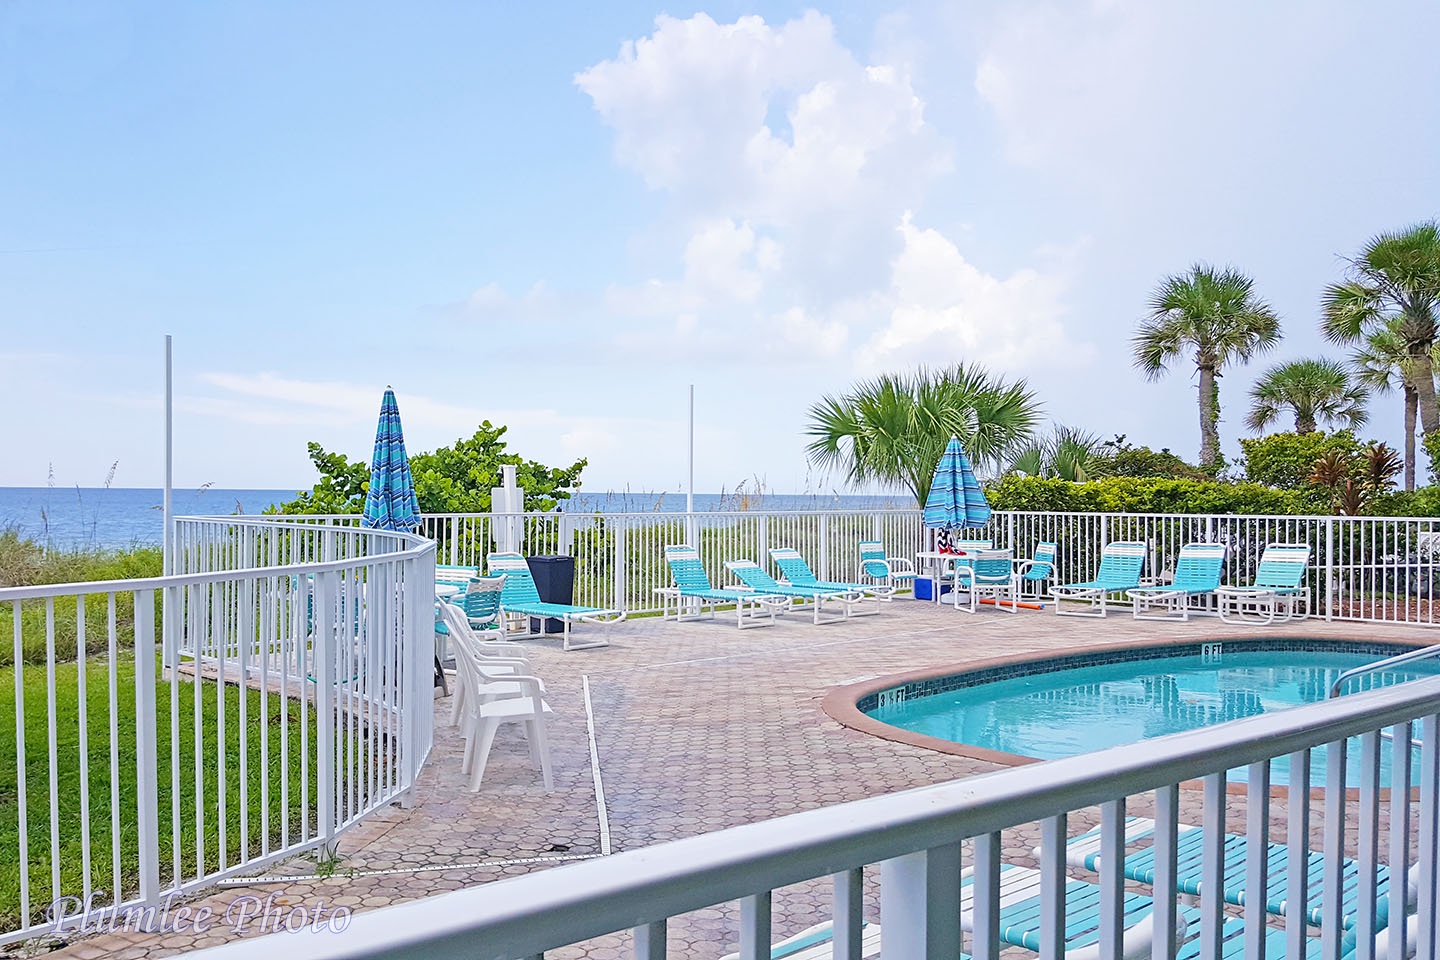 The pool deck and view of the beach in the background.